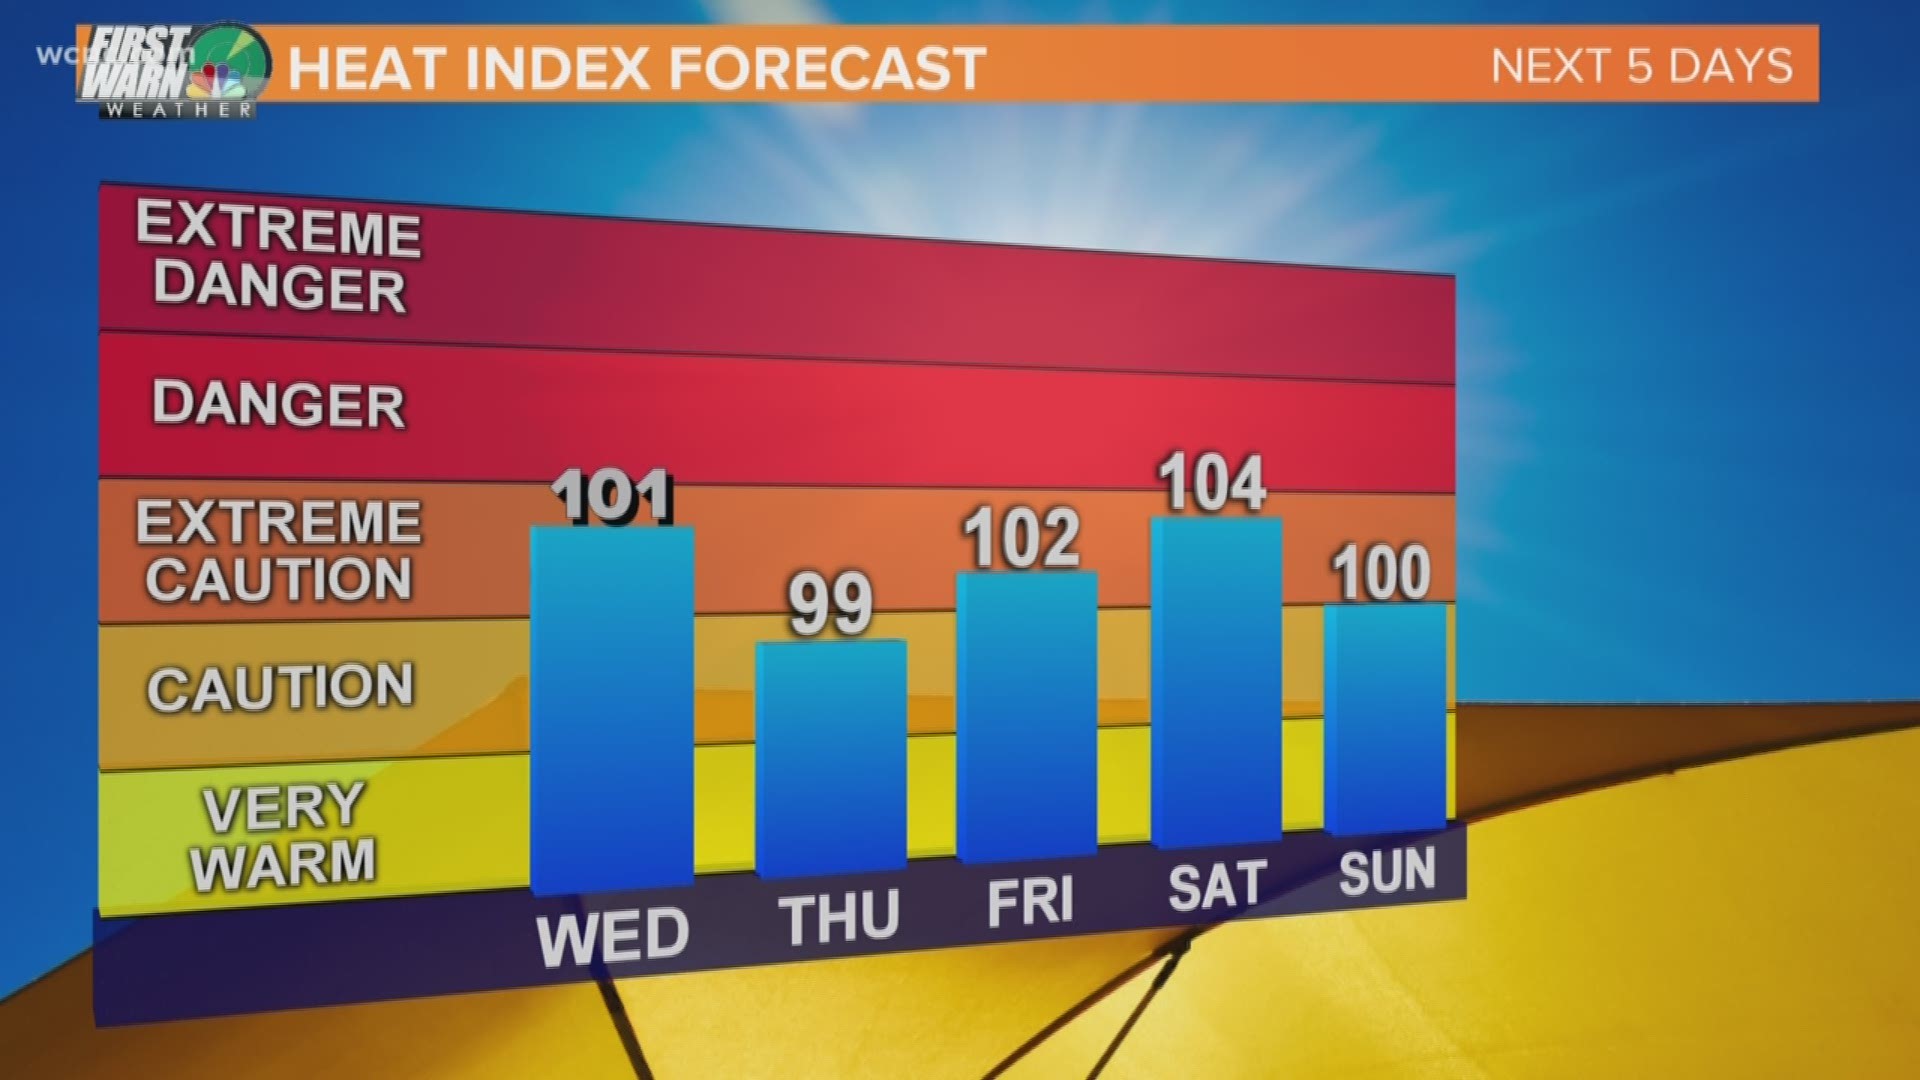 Mother Nature is going to crank up the heat this week. It's going to feel like it's over 100 degrees with a heat index of 104 degrees Saturday.